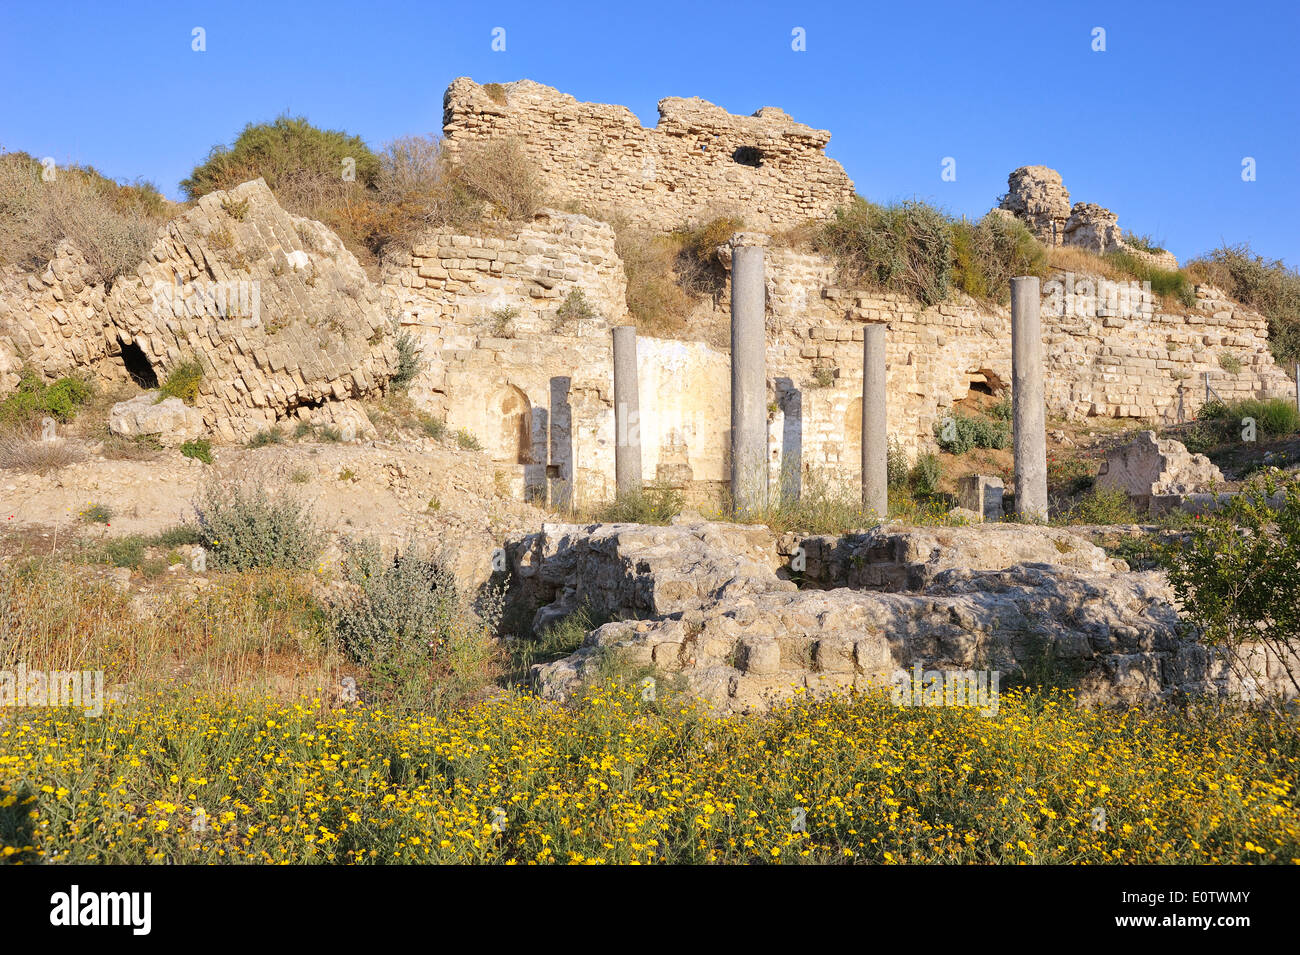 Ruins of an ancient temple near the city of Ashqelon, Israel Stock Photo